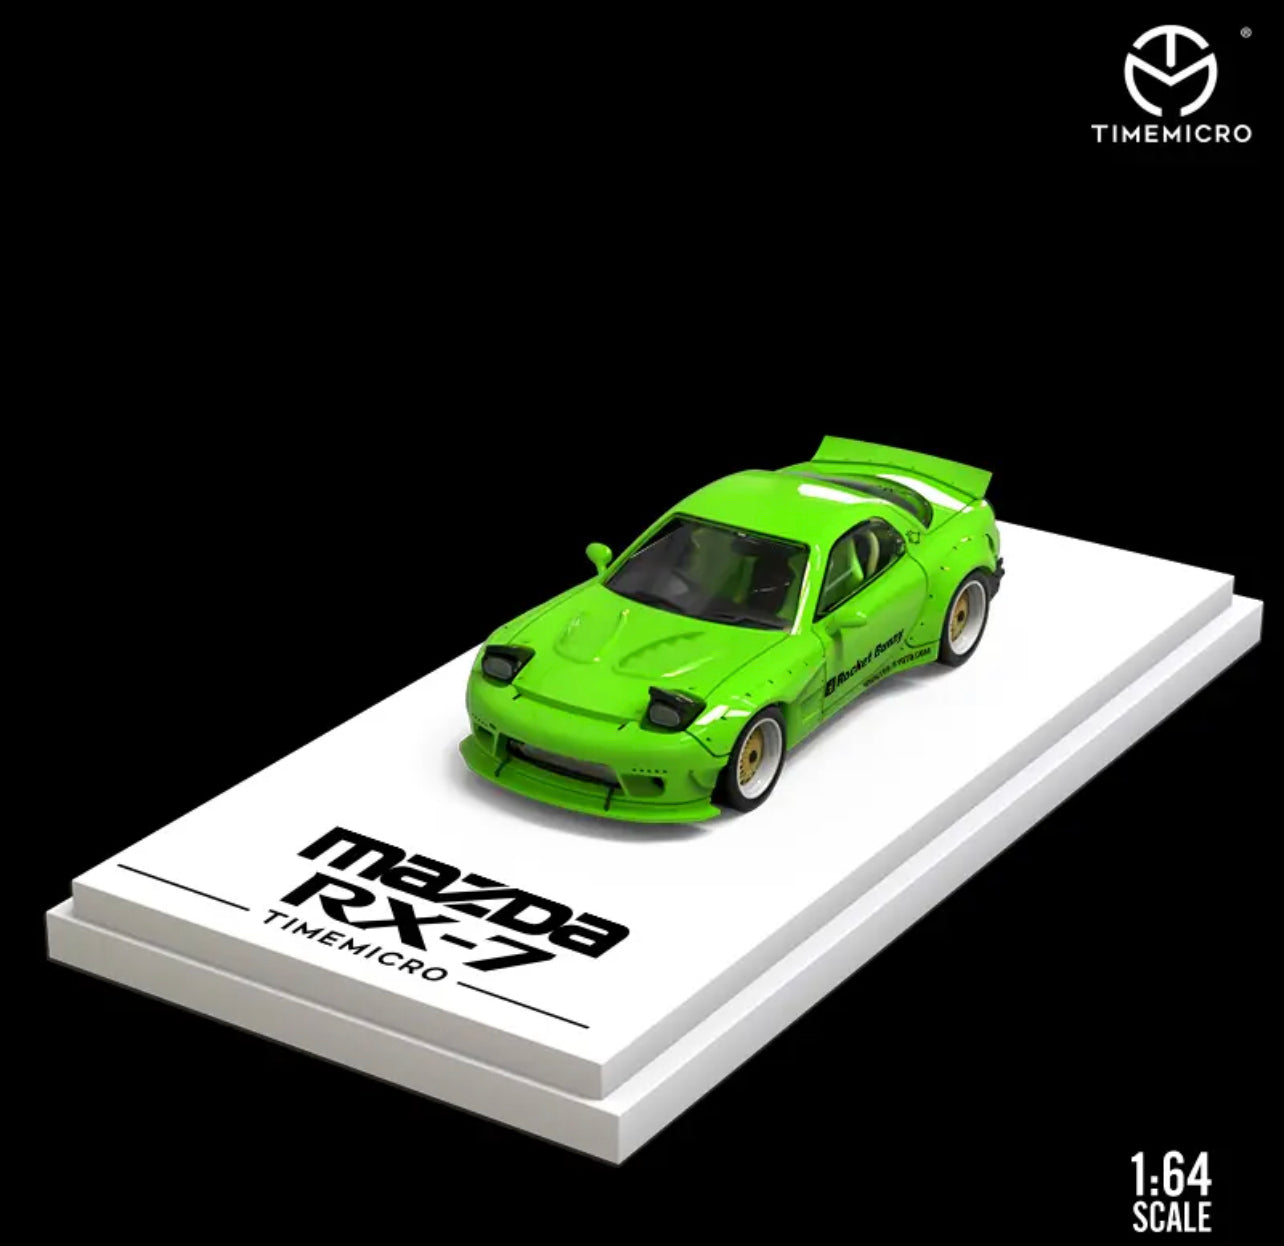 Time Micro 1:64 Mazda RX7 FD With Engine - Green *2 Styles*